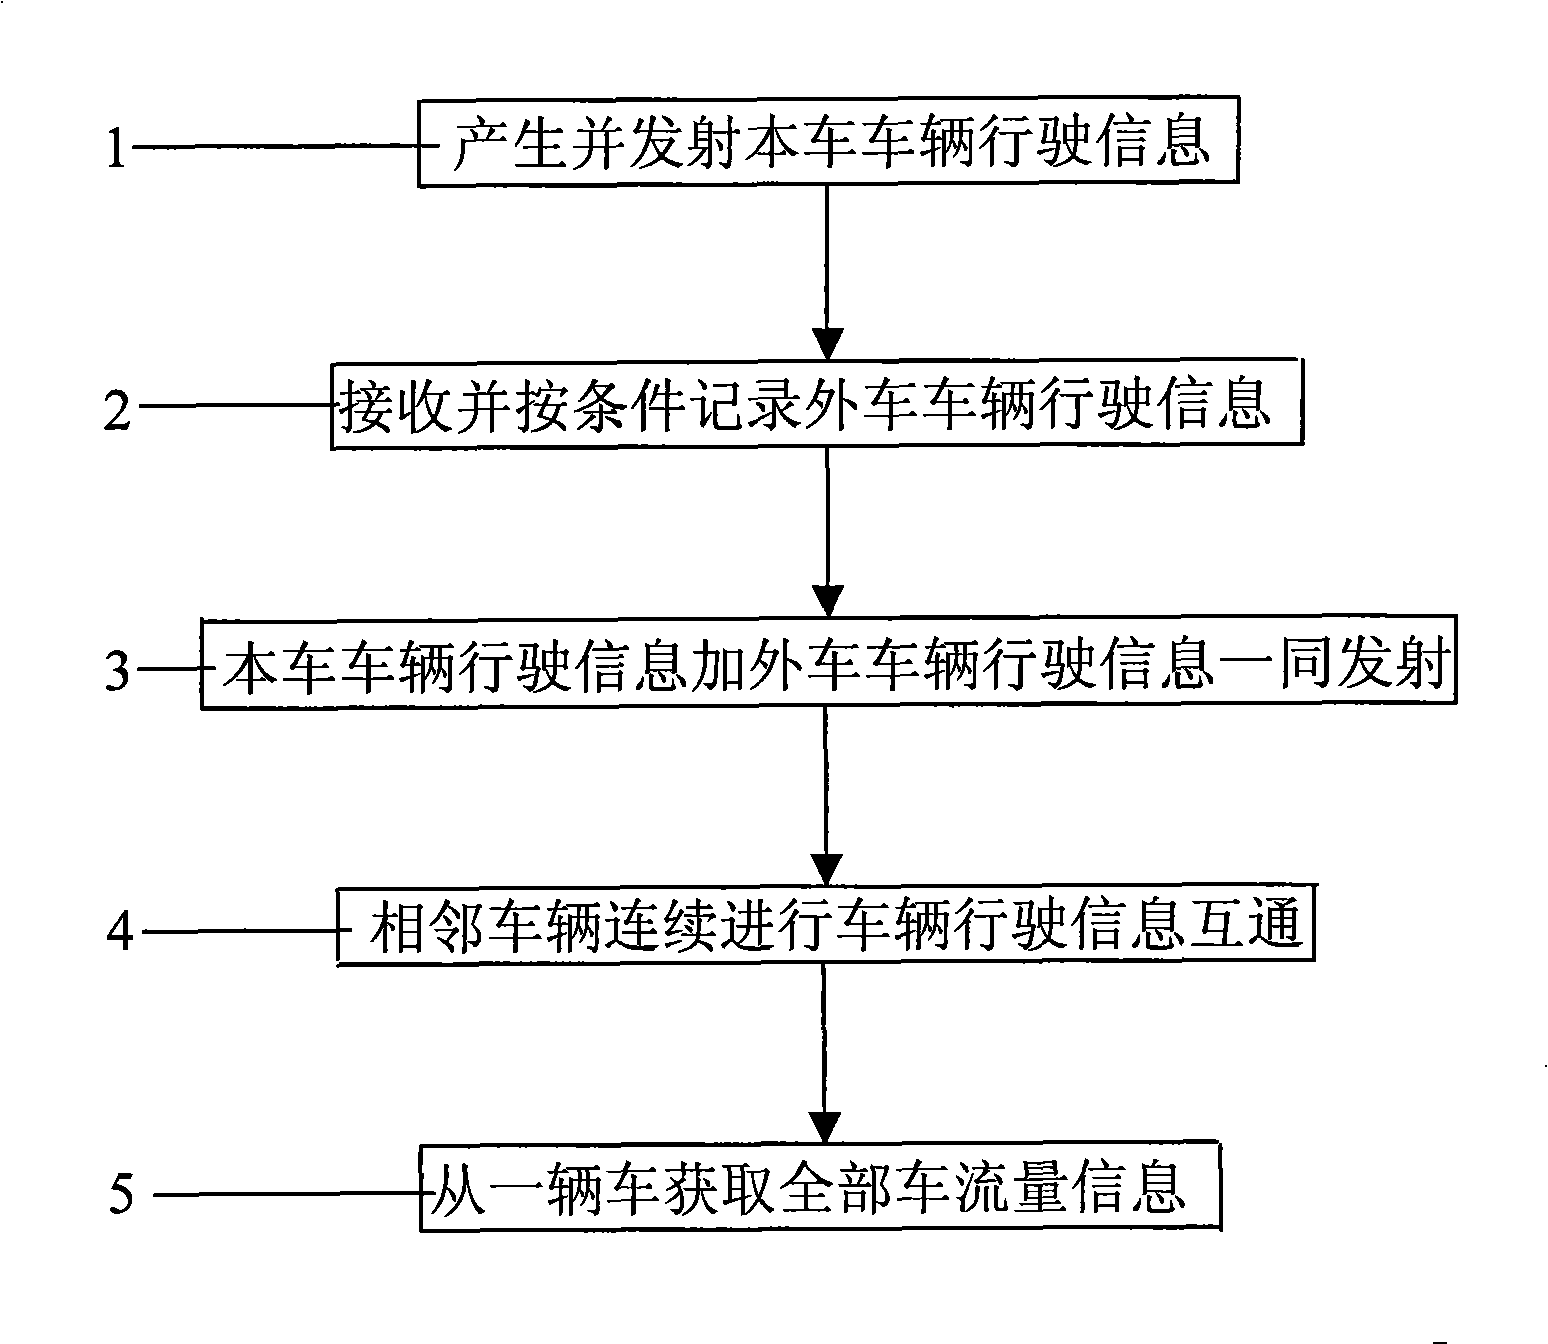 Method and apparatus for detecting vehicle flow information